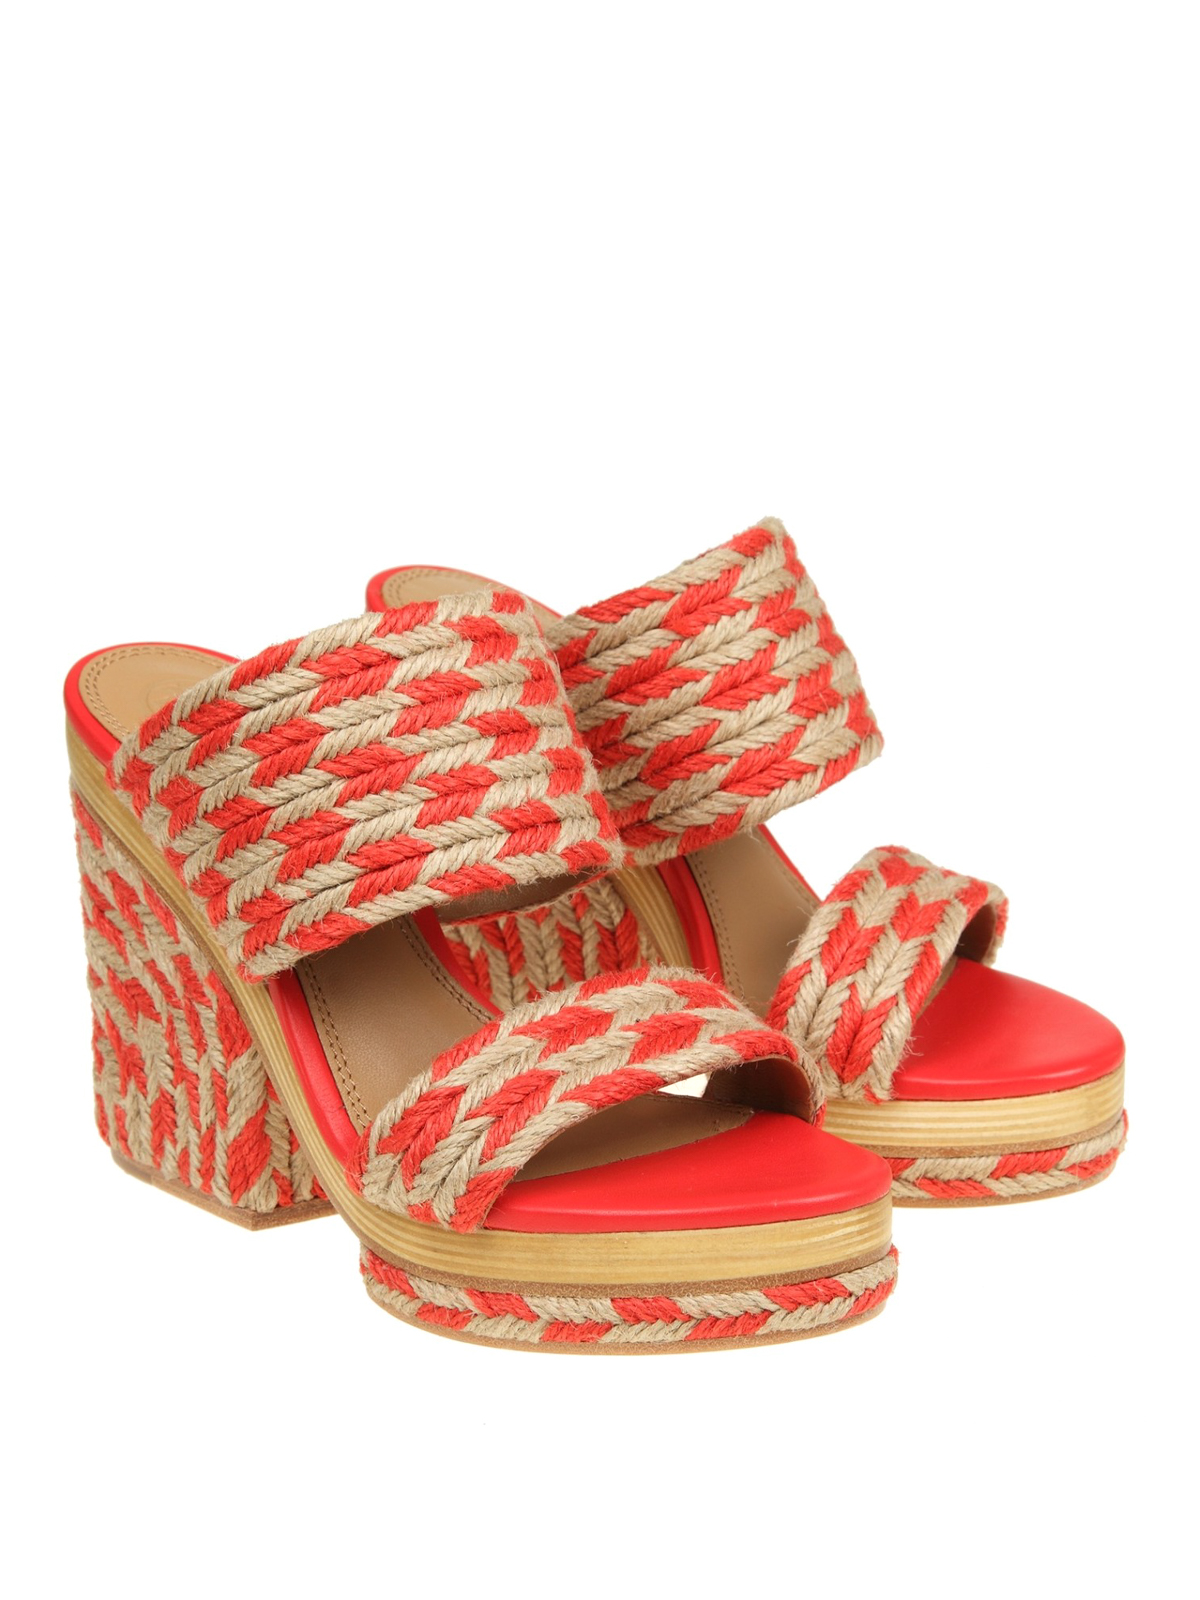 tory burch red slides